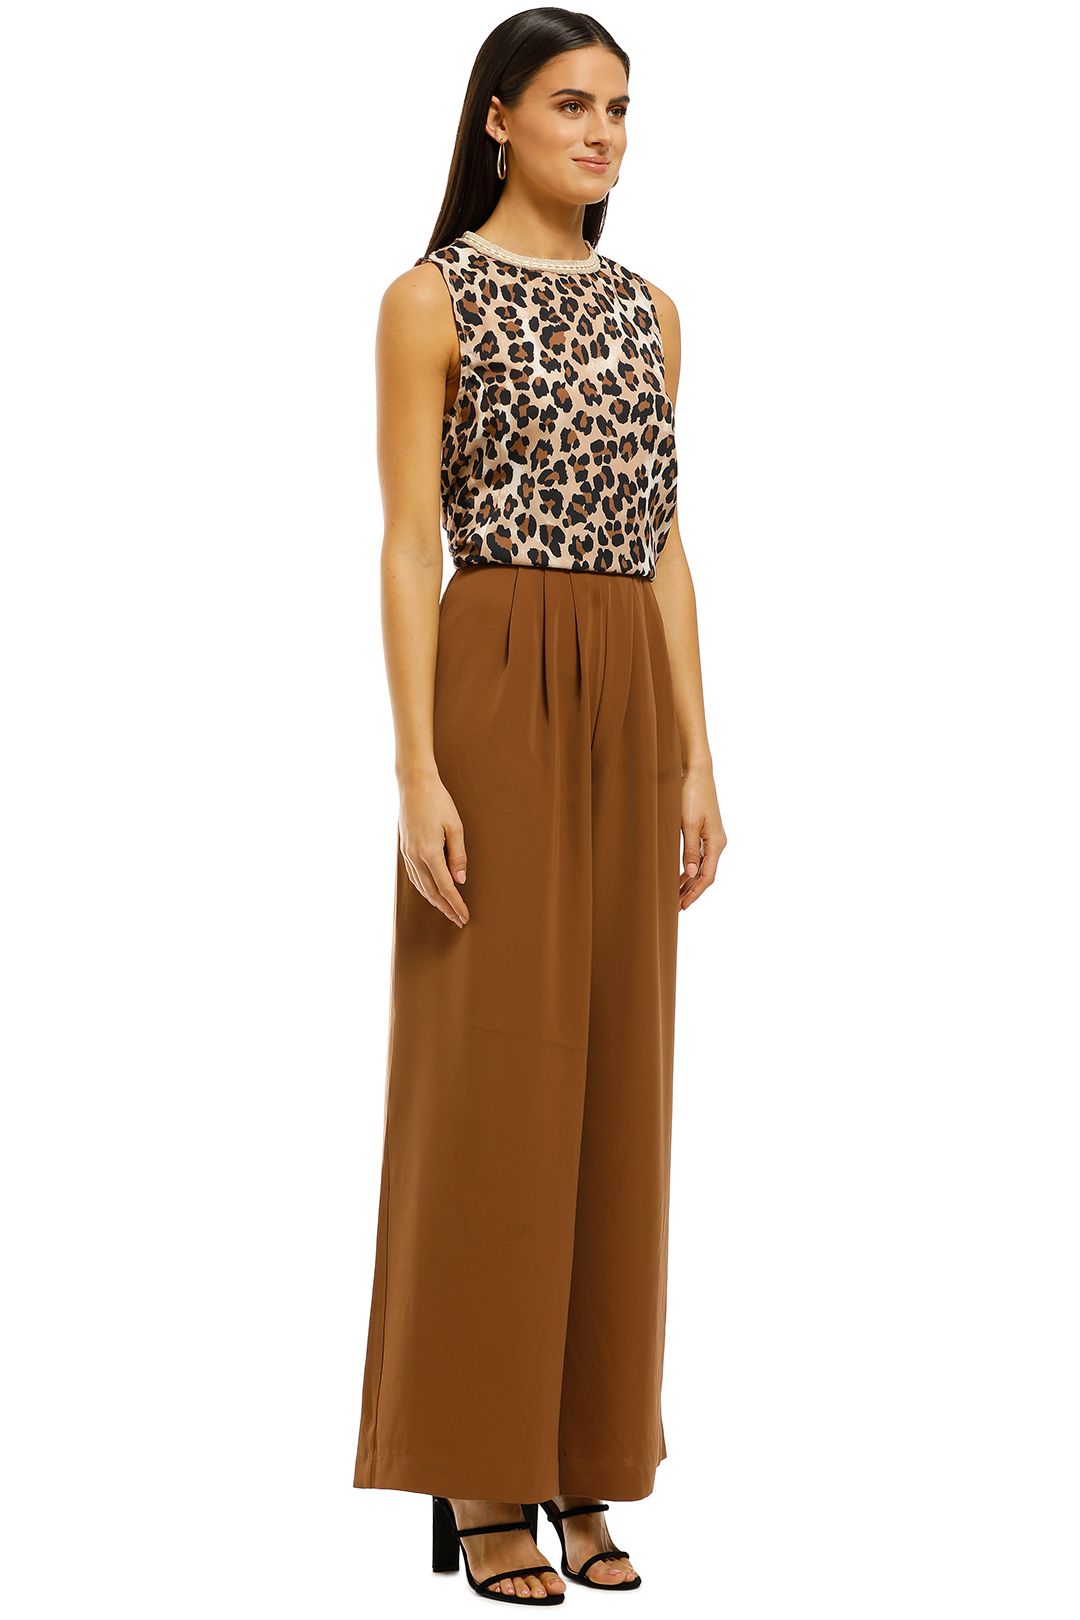 Cooper-by-Trelise-Cooper-Into-The-Wild-Top-Leopard-Side